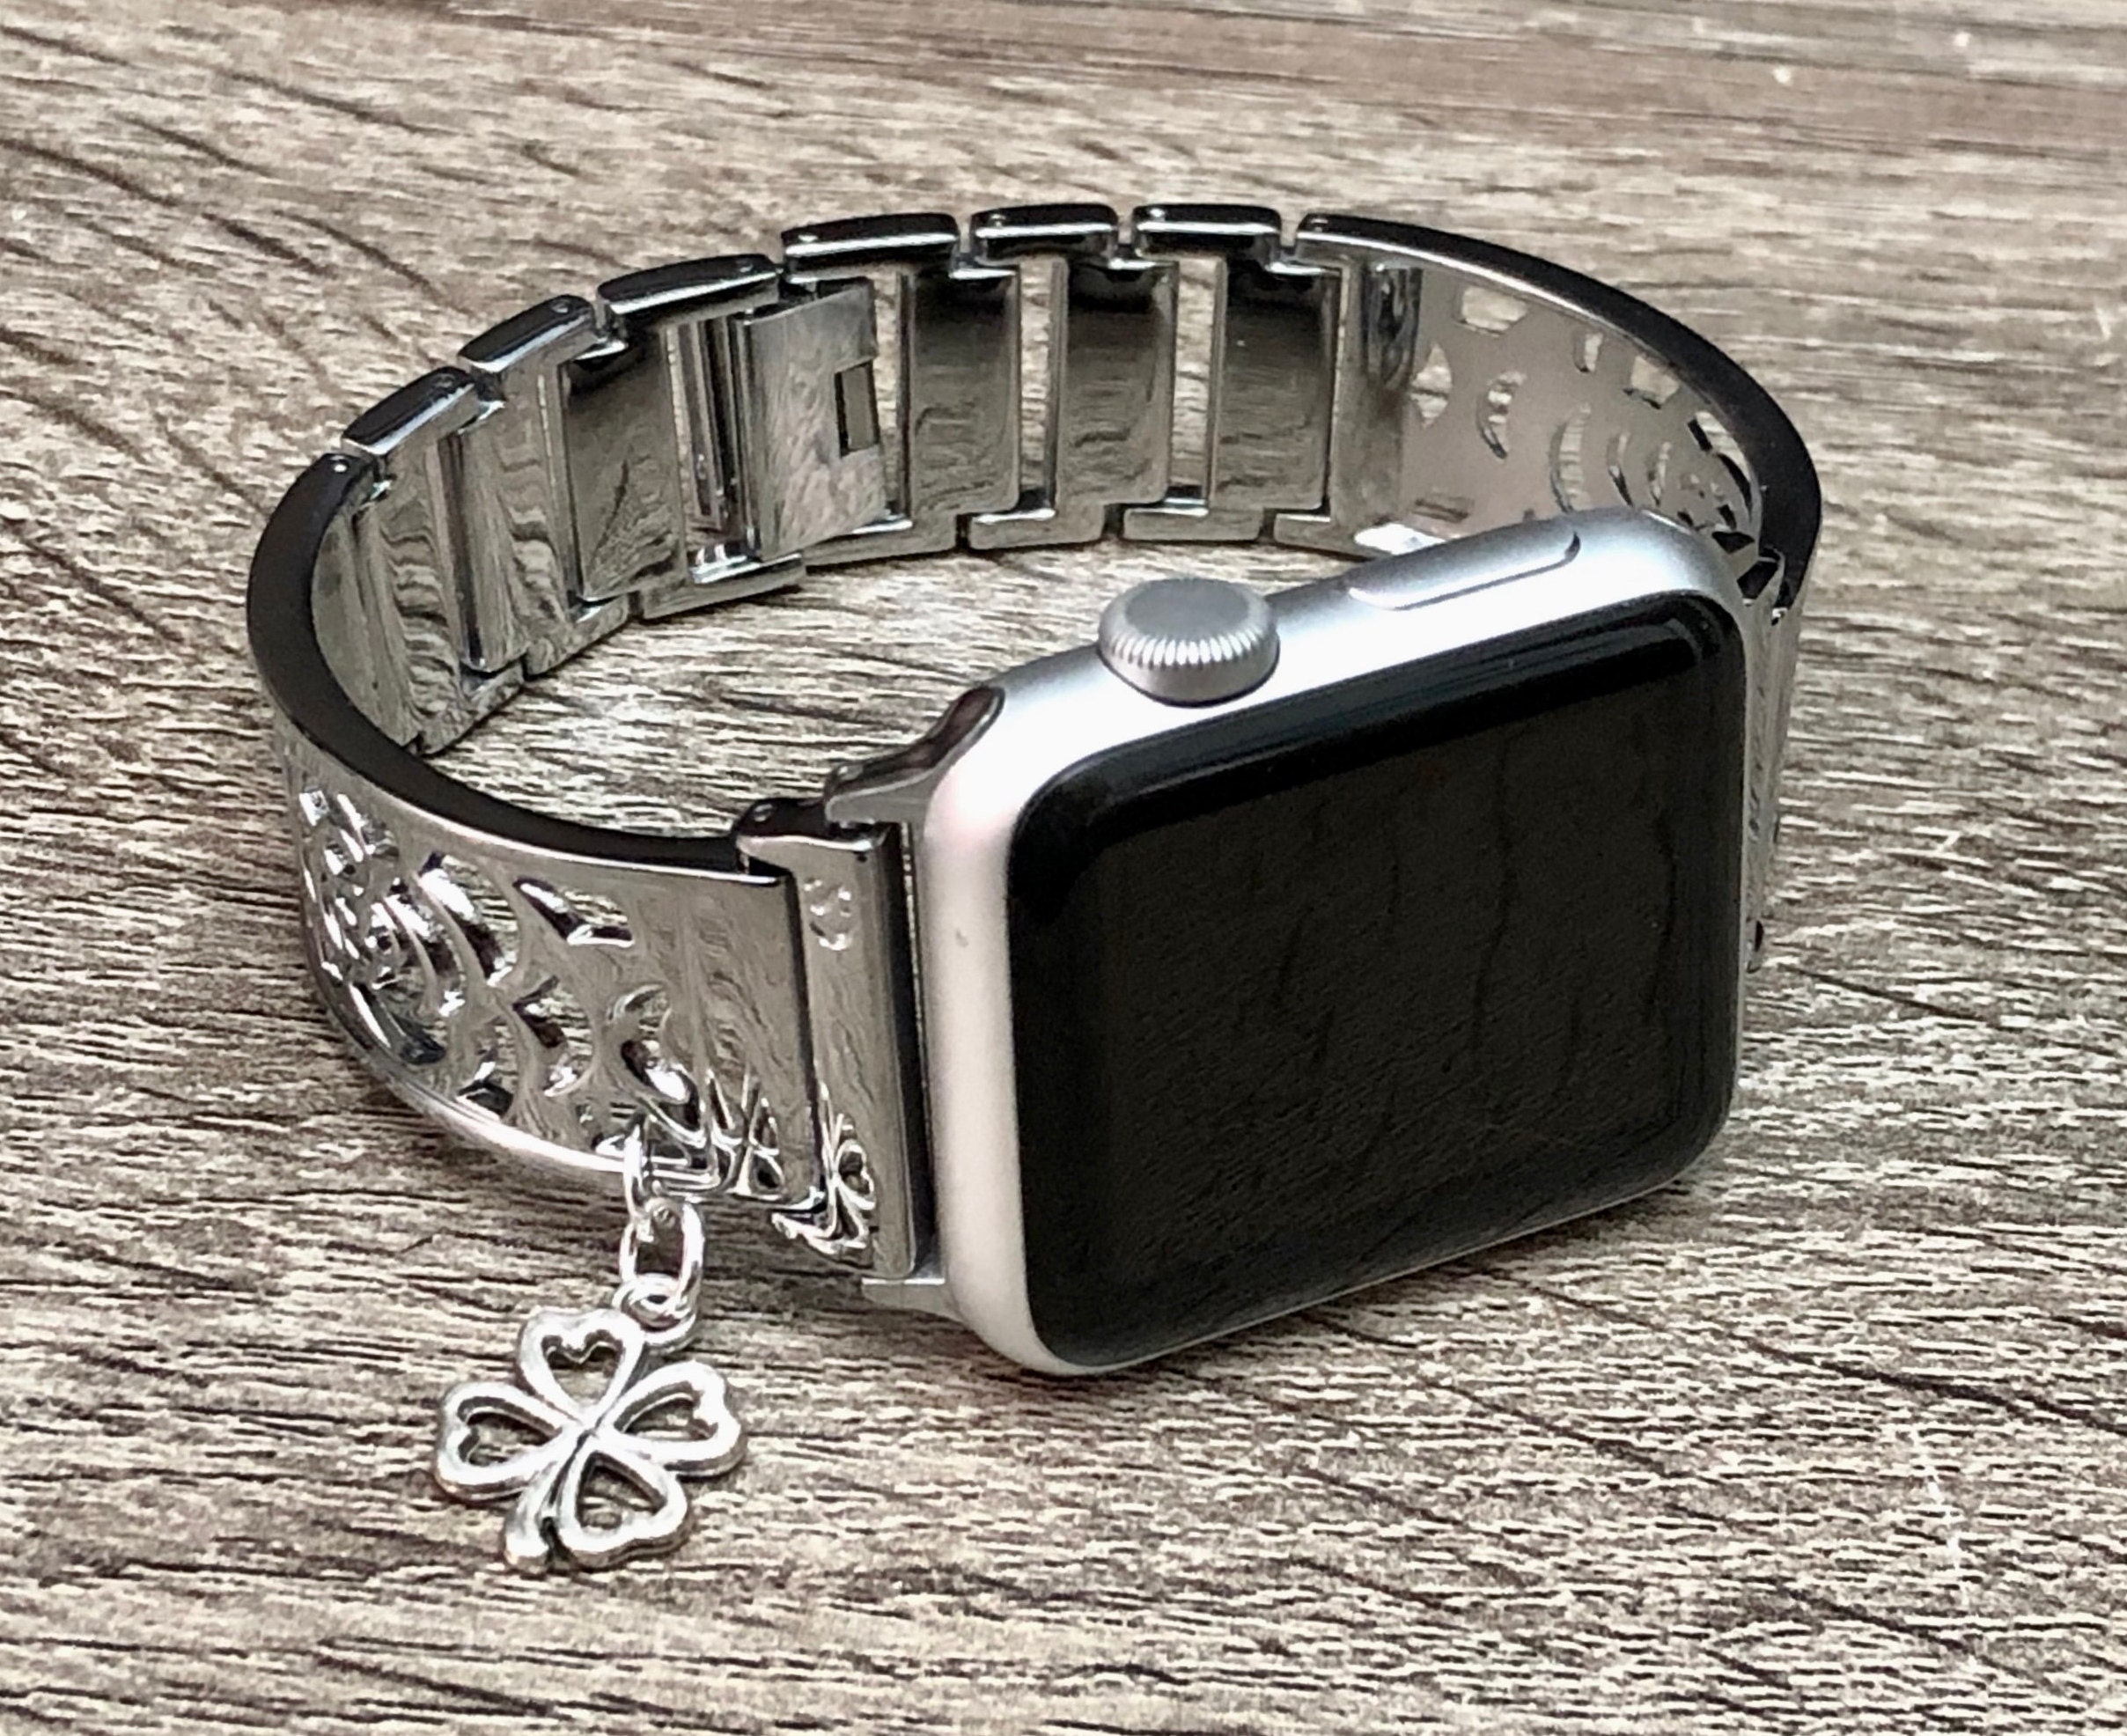 Apple Watch band with multiple straps – eWatch Straps